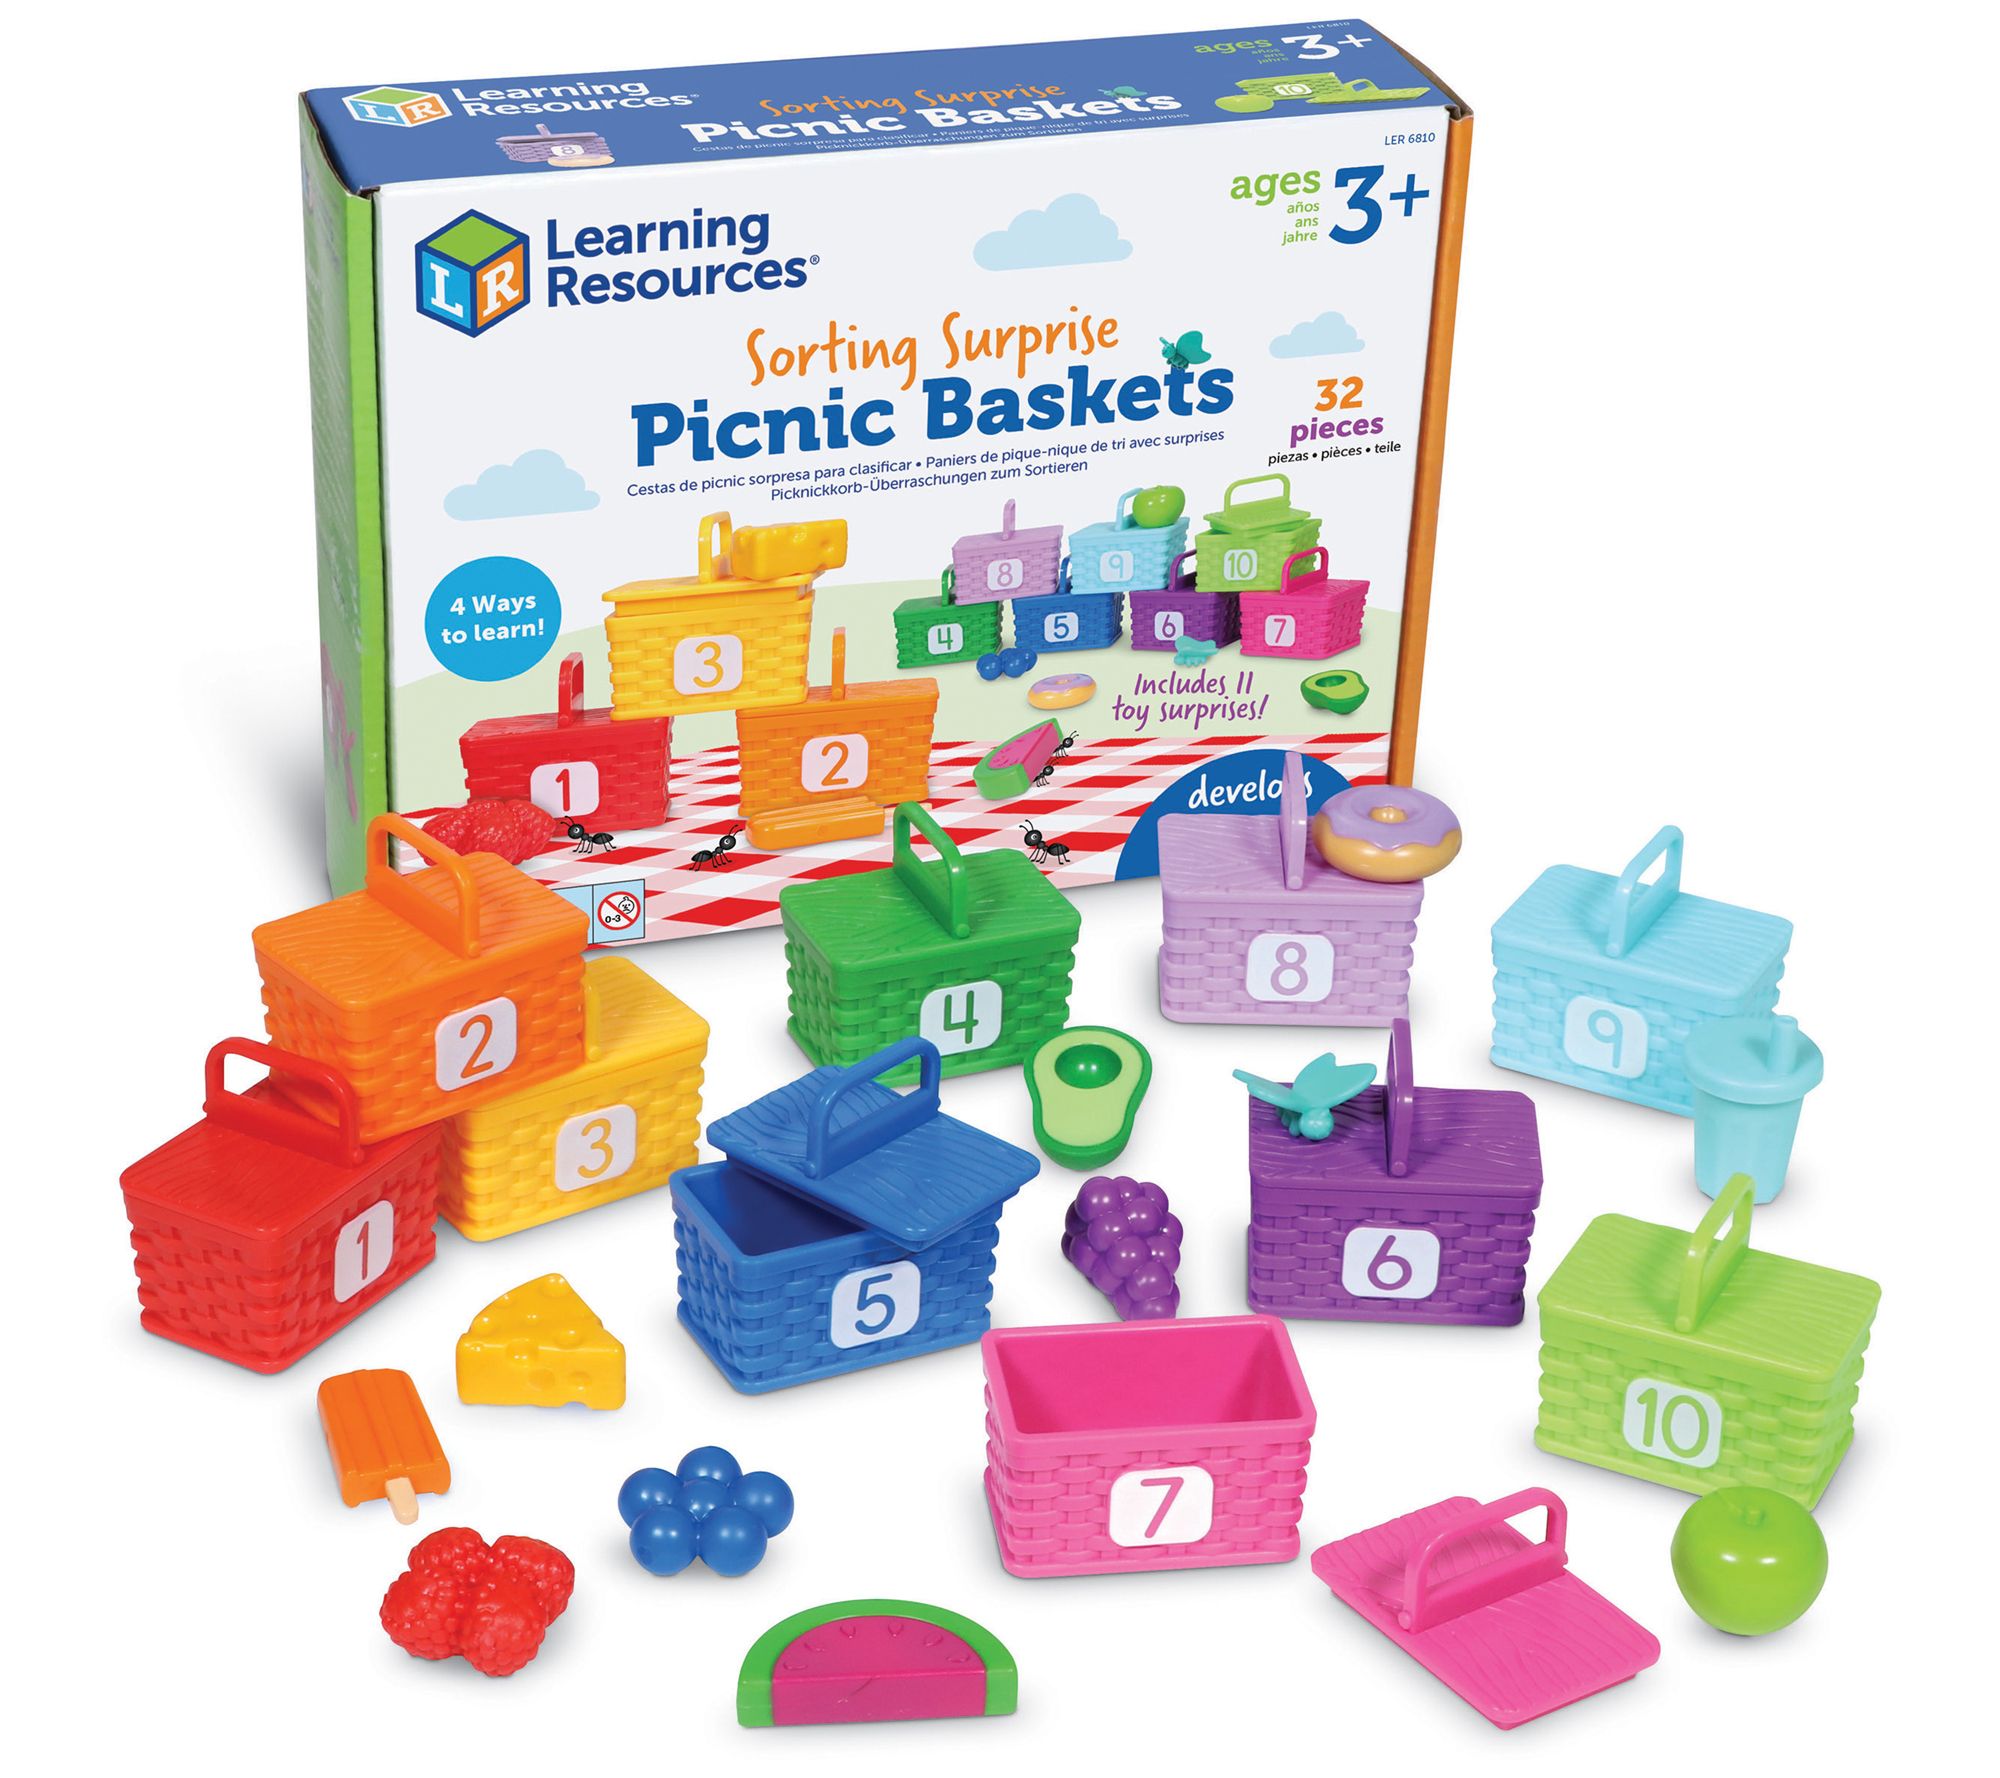 Learning Resources Sorting Picnic Baskets Activ ity Set 